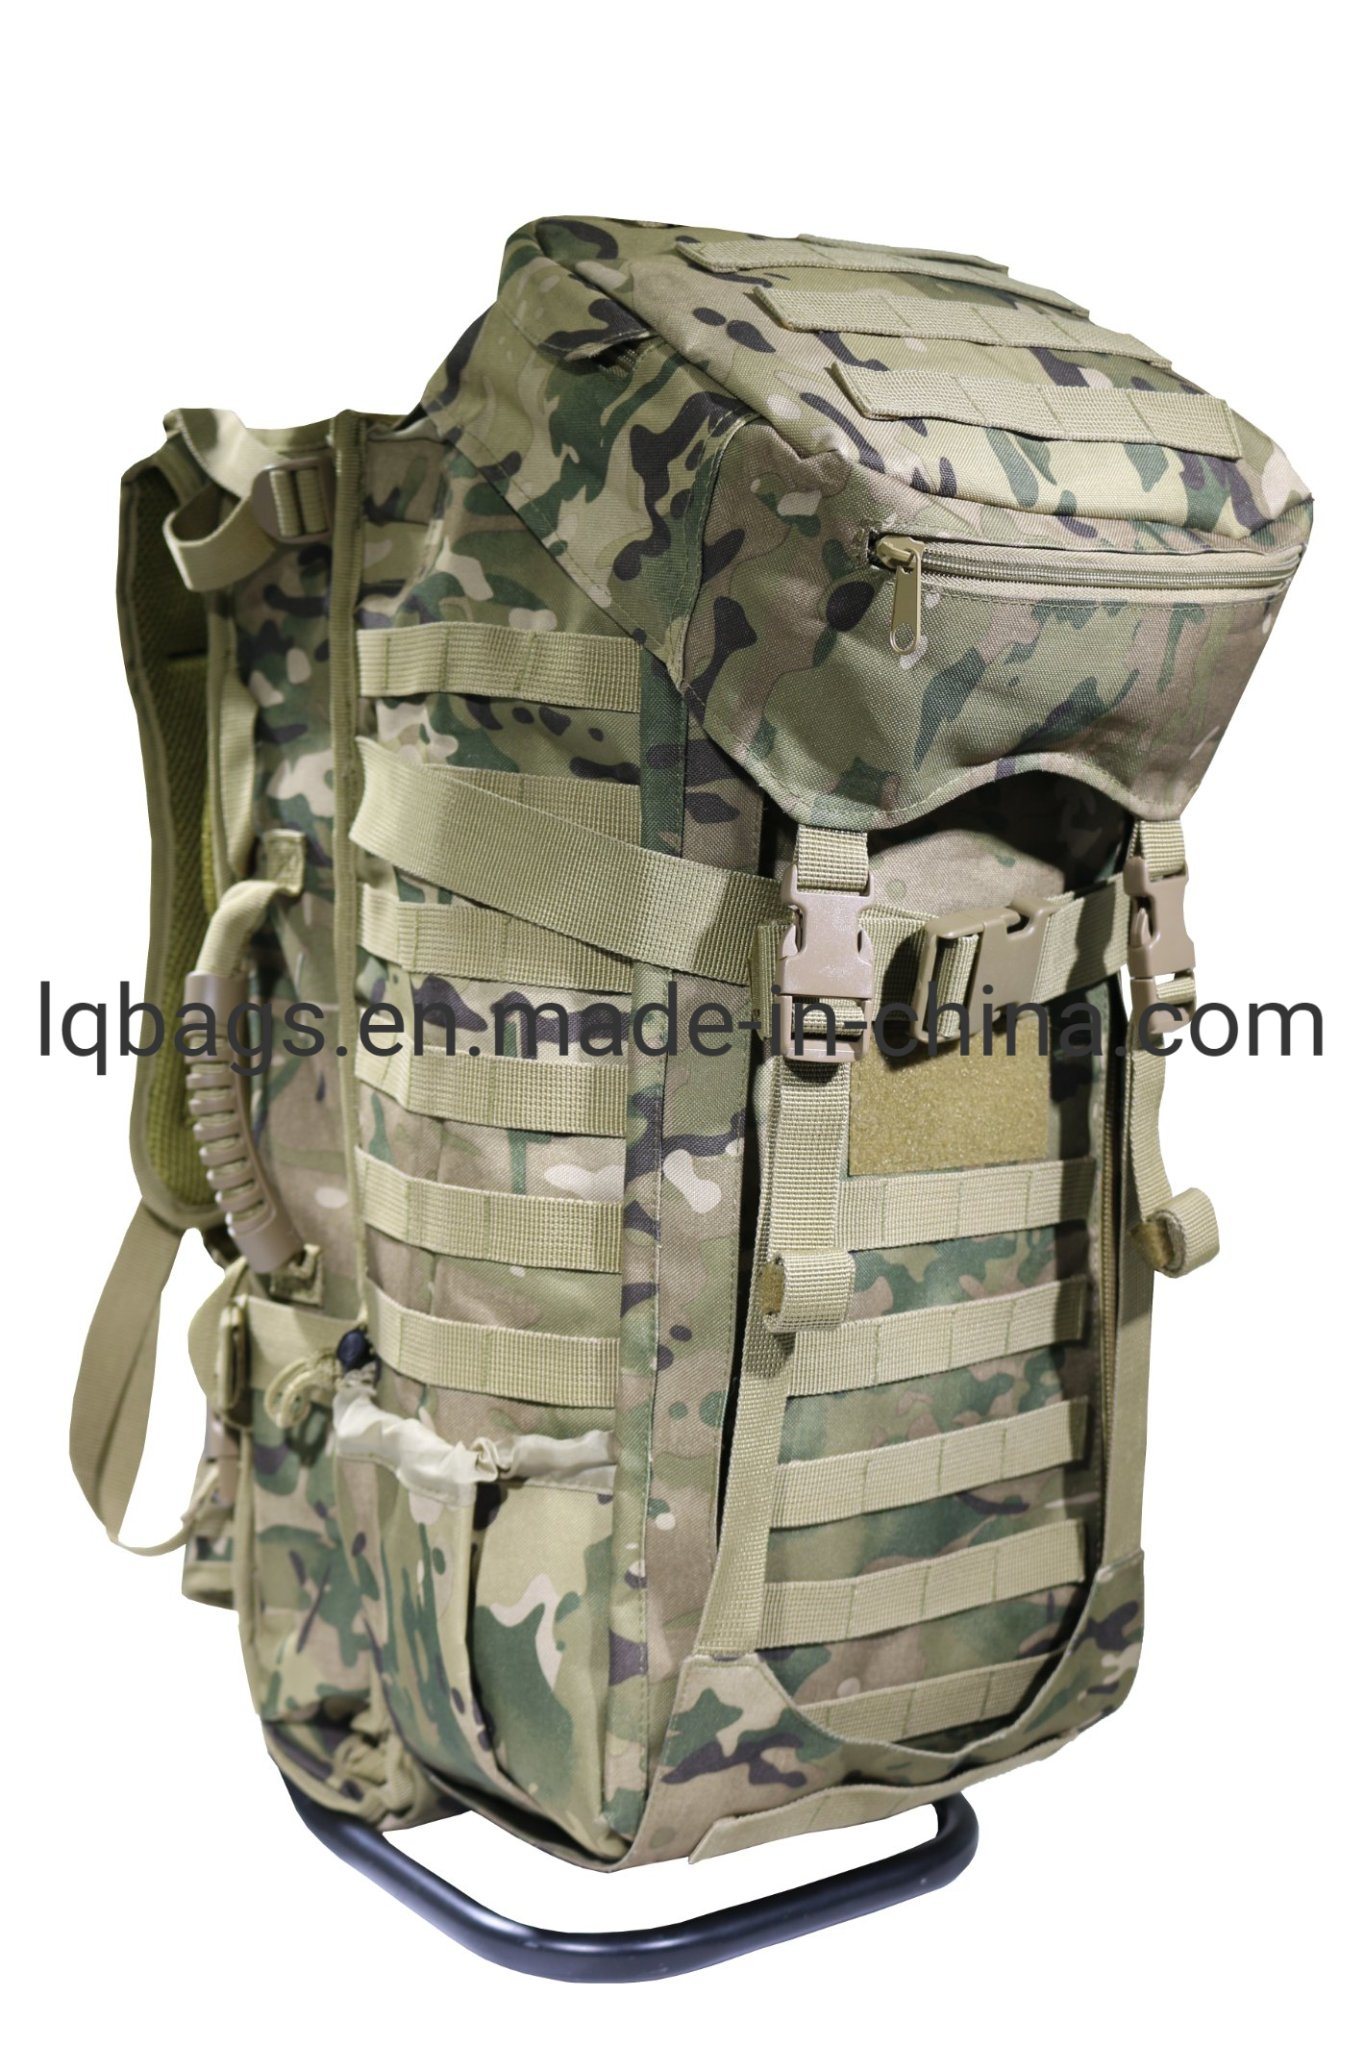 Military Tactical Molle Sniper Rifle Backpack Large Outdoor Hunting Backpack